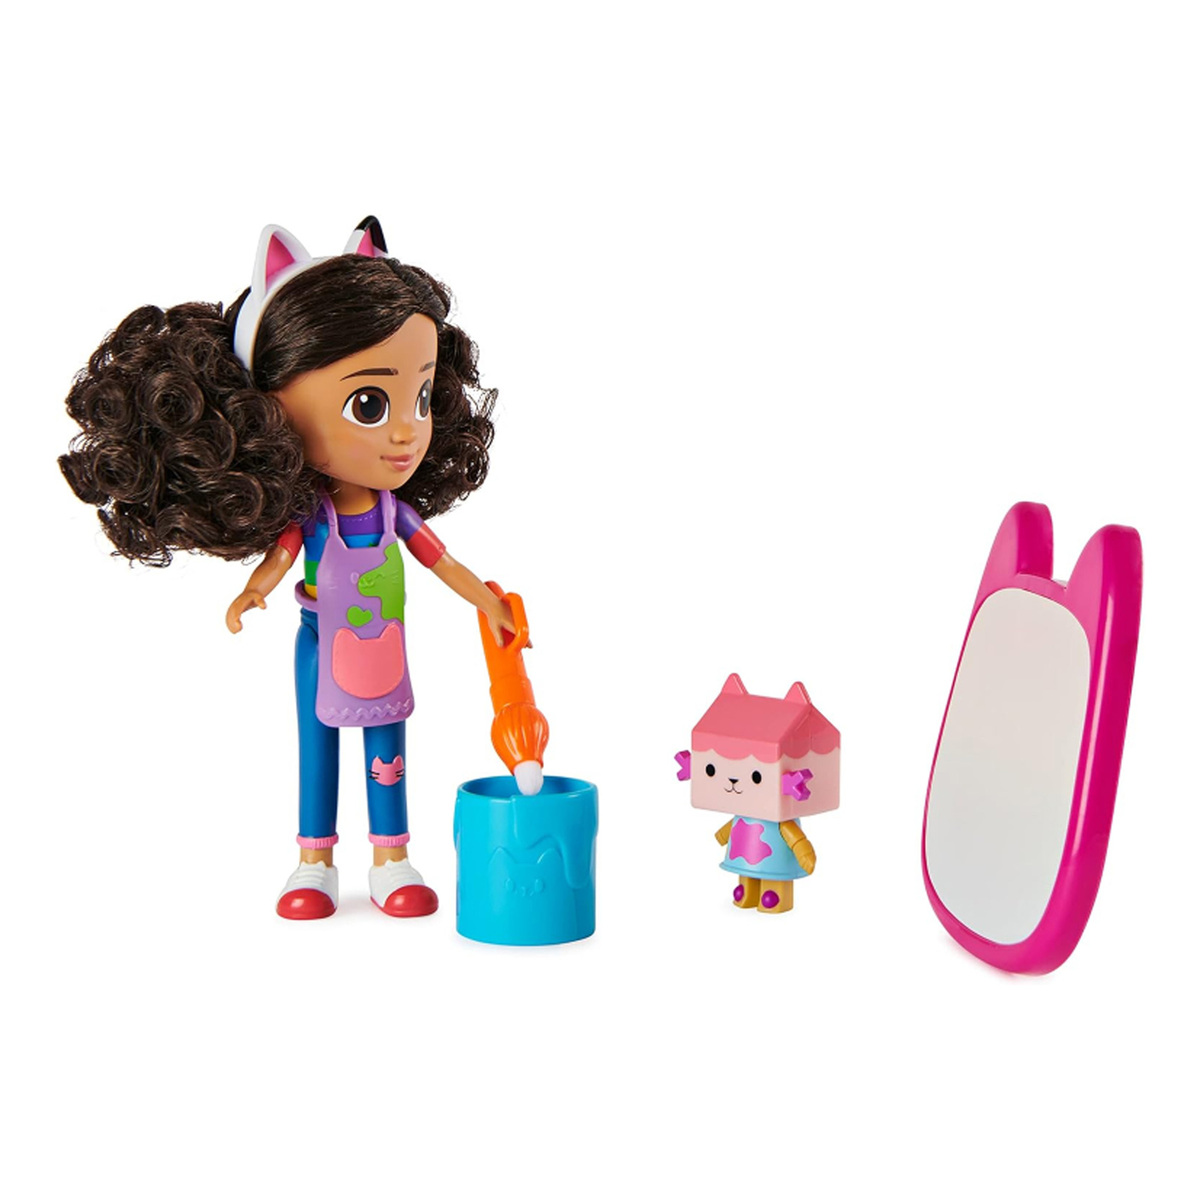 Gabby’s Dollhouse Gabby Deluxe Craft Dolls and Accessories with Water Pad and Water Brush Pen, 6064228